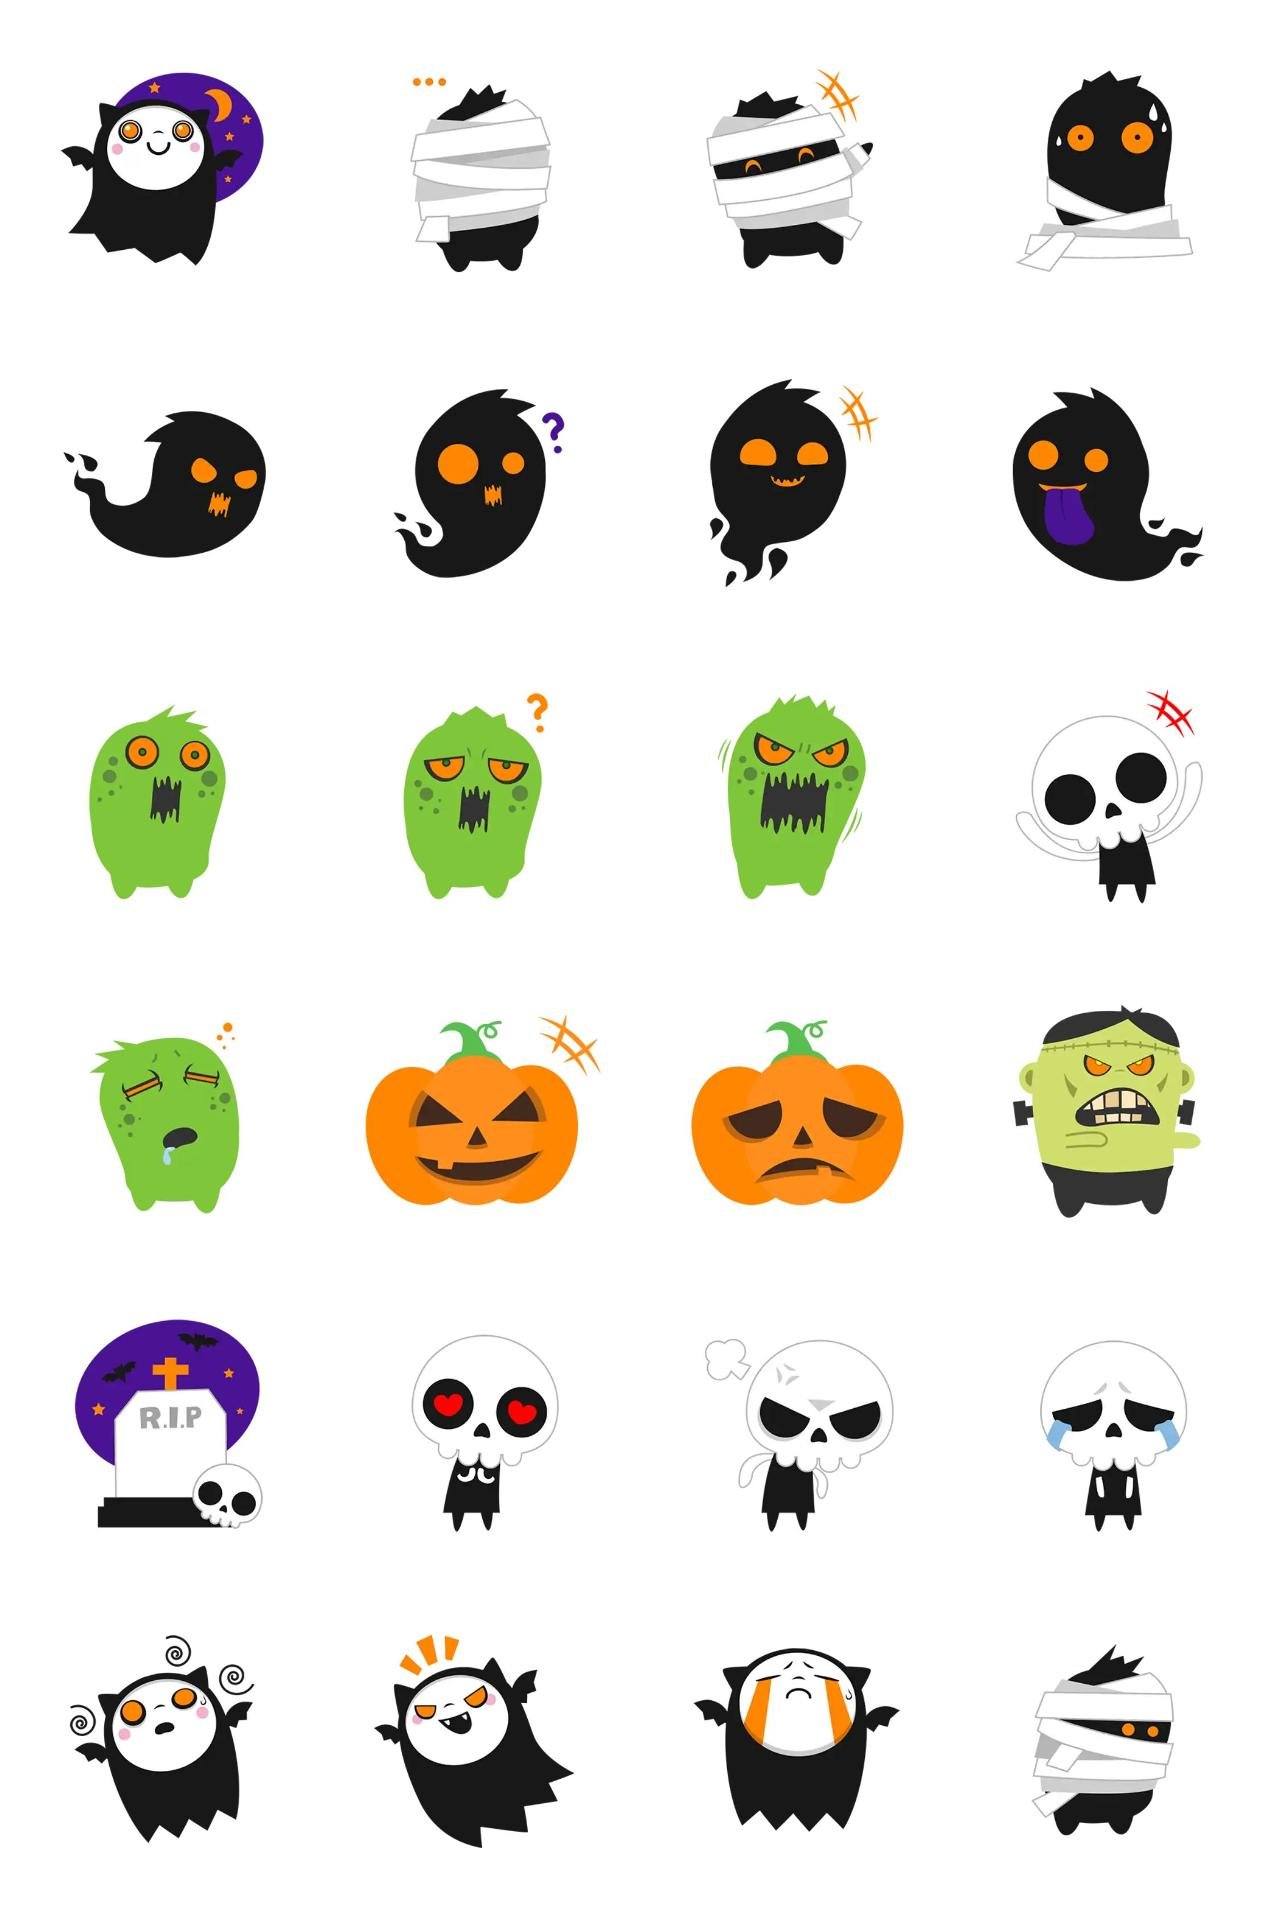 Happy Halloween buddies Gag,Halloween sticker pack for Whatsapp, Telegram, Signal, and others chatting and message apps